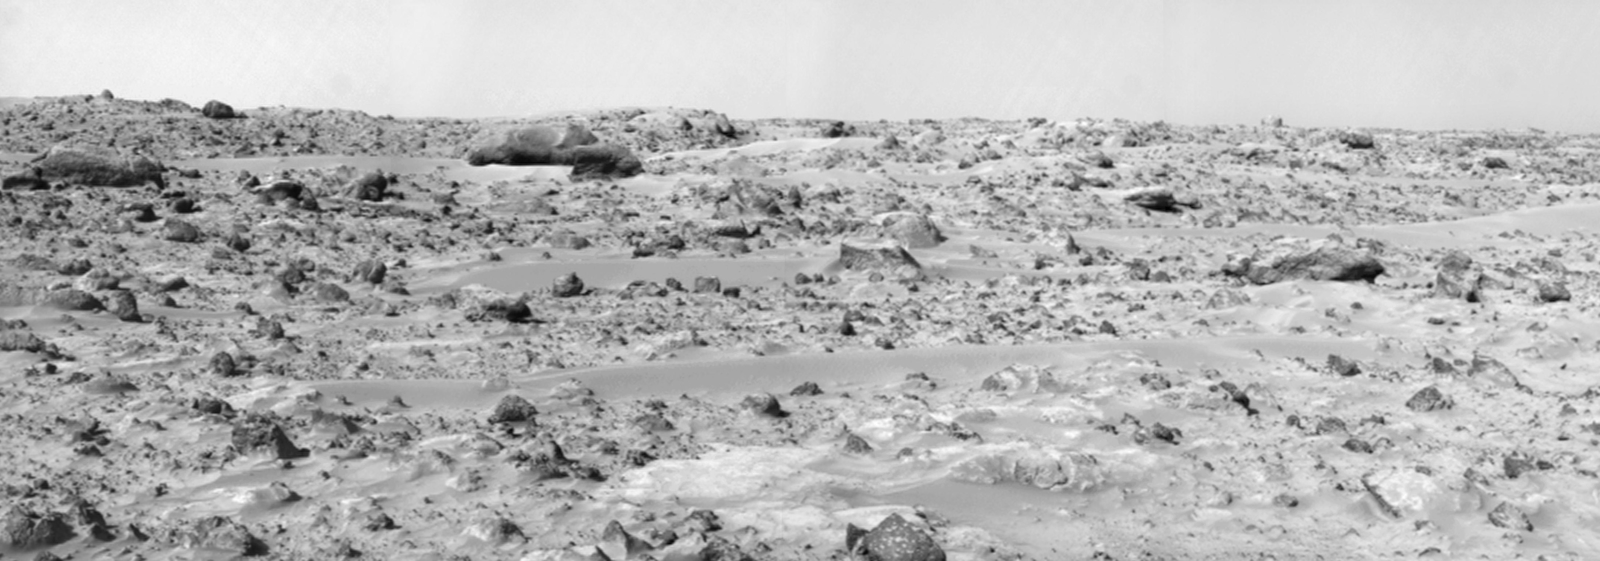 This view from NASA's Mars Pathfinder was produced in 1997 by combining 8 individual 'Superpan' scenes from the left and right eyes of the IMP camera. The large, elongated rock 'Zaphod' sits left of center in the middle distance.